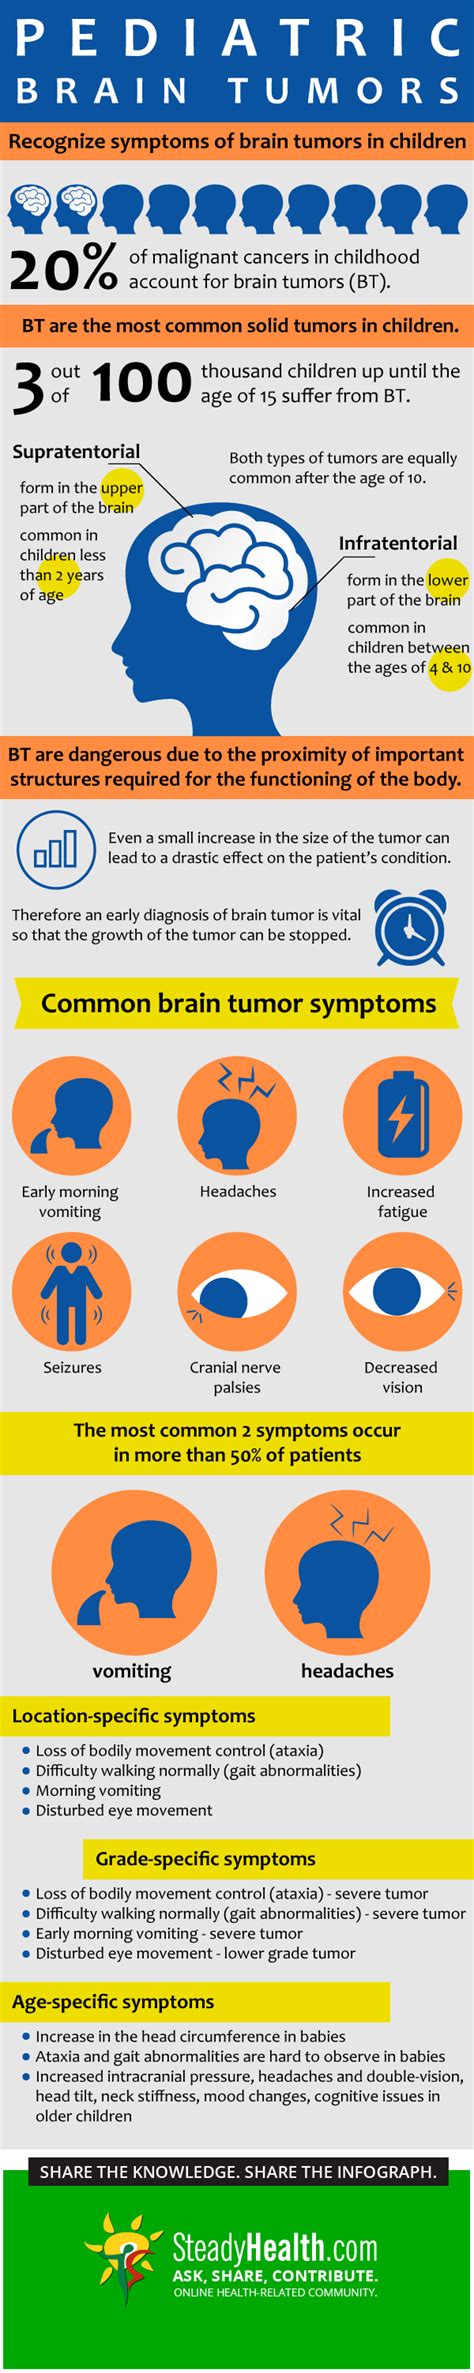 Brain tumors are the most common solid cancer in children < 15 years of age and are the 2nd symptoms and signs. Pediatric Brain Tumors: Recognizing Early Symptoms And ...